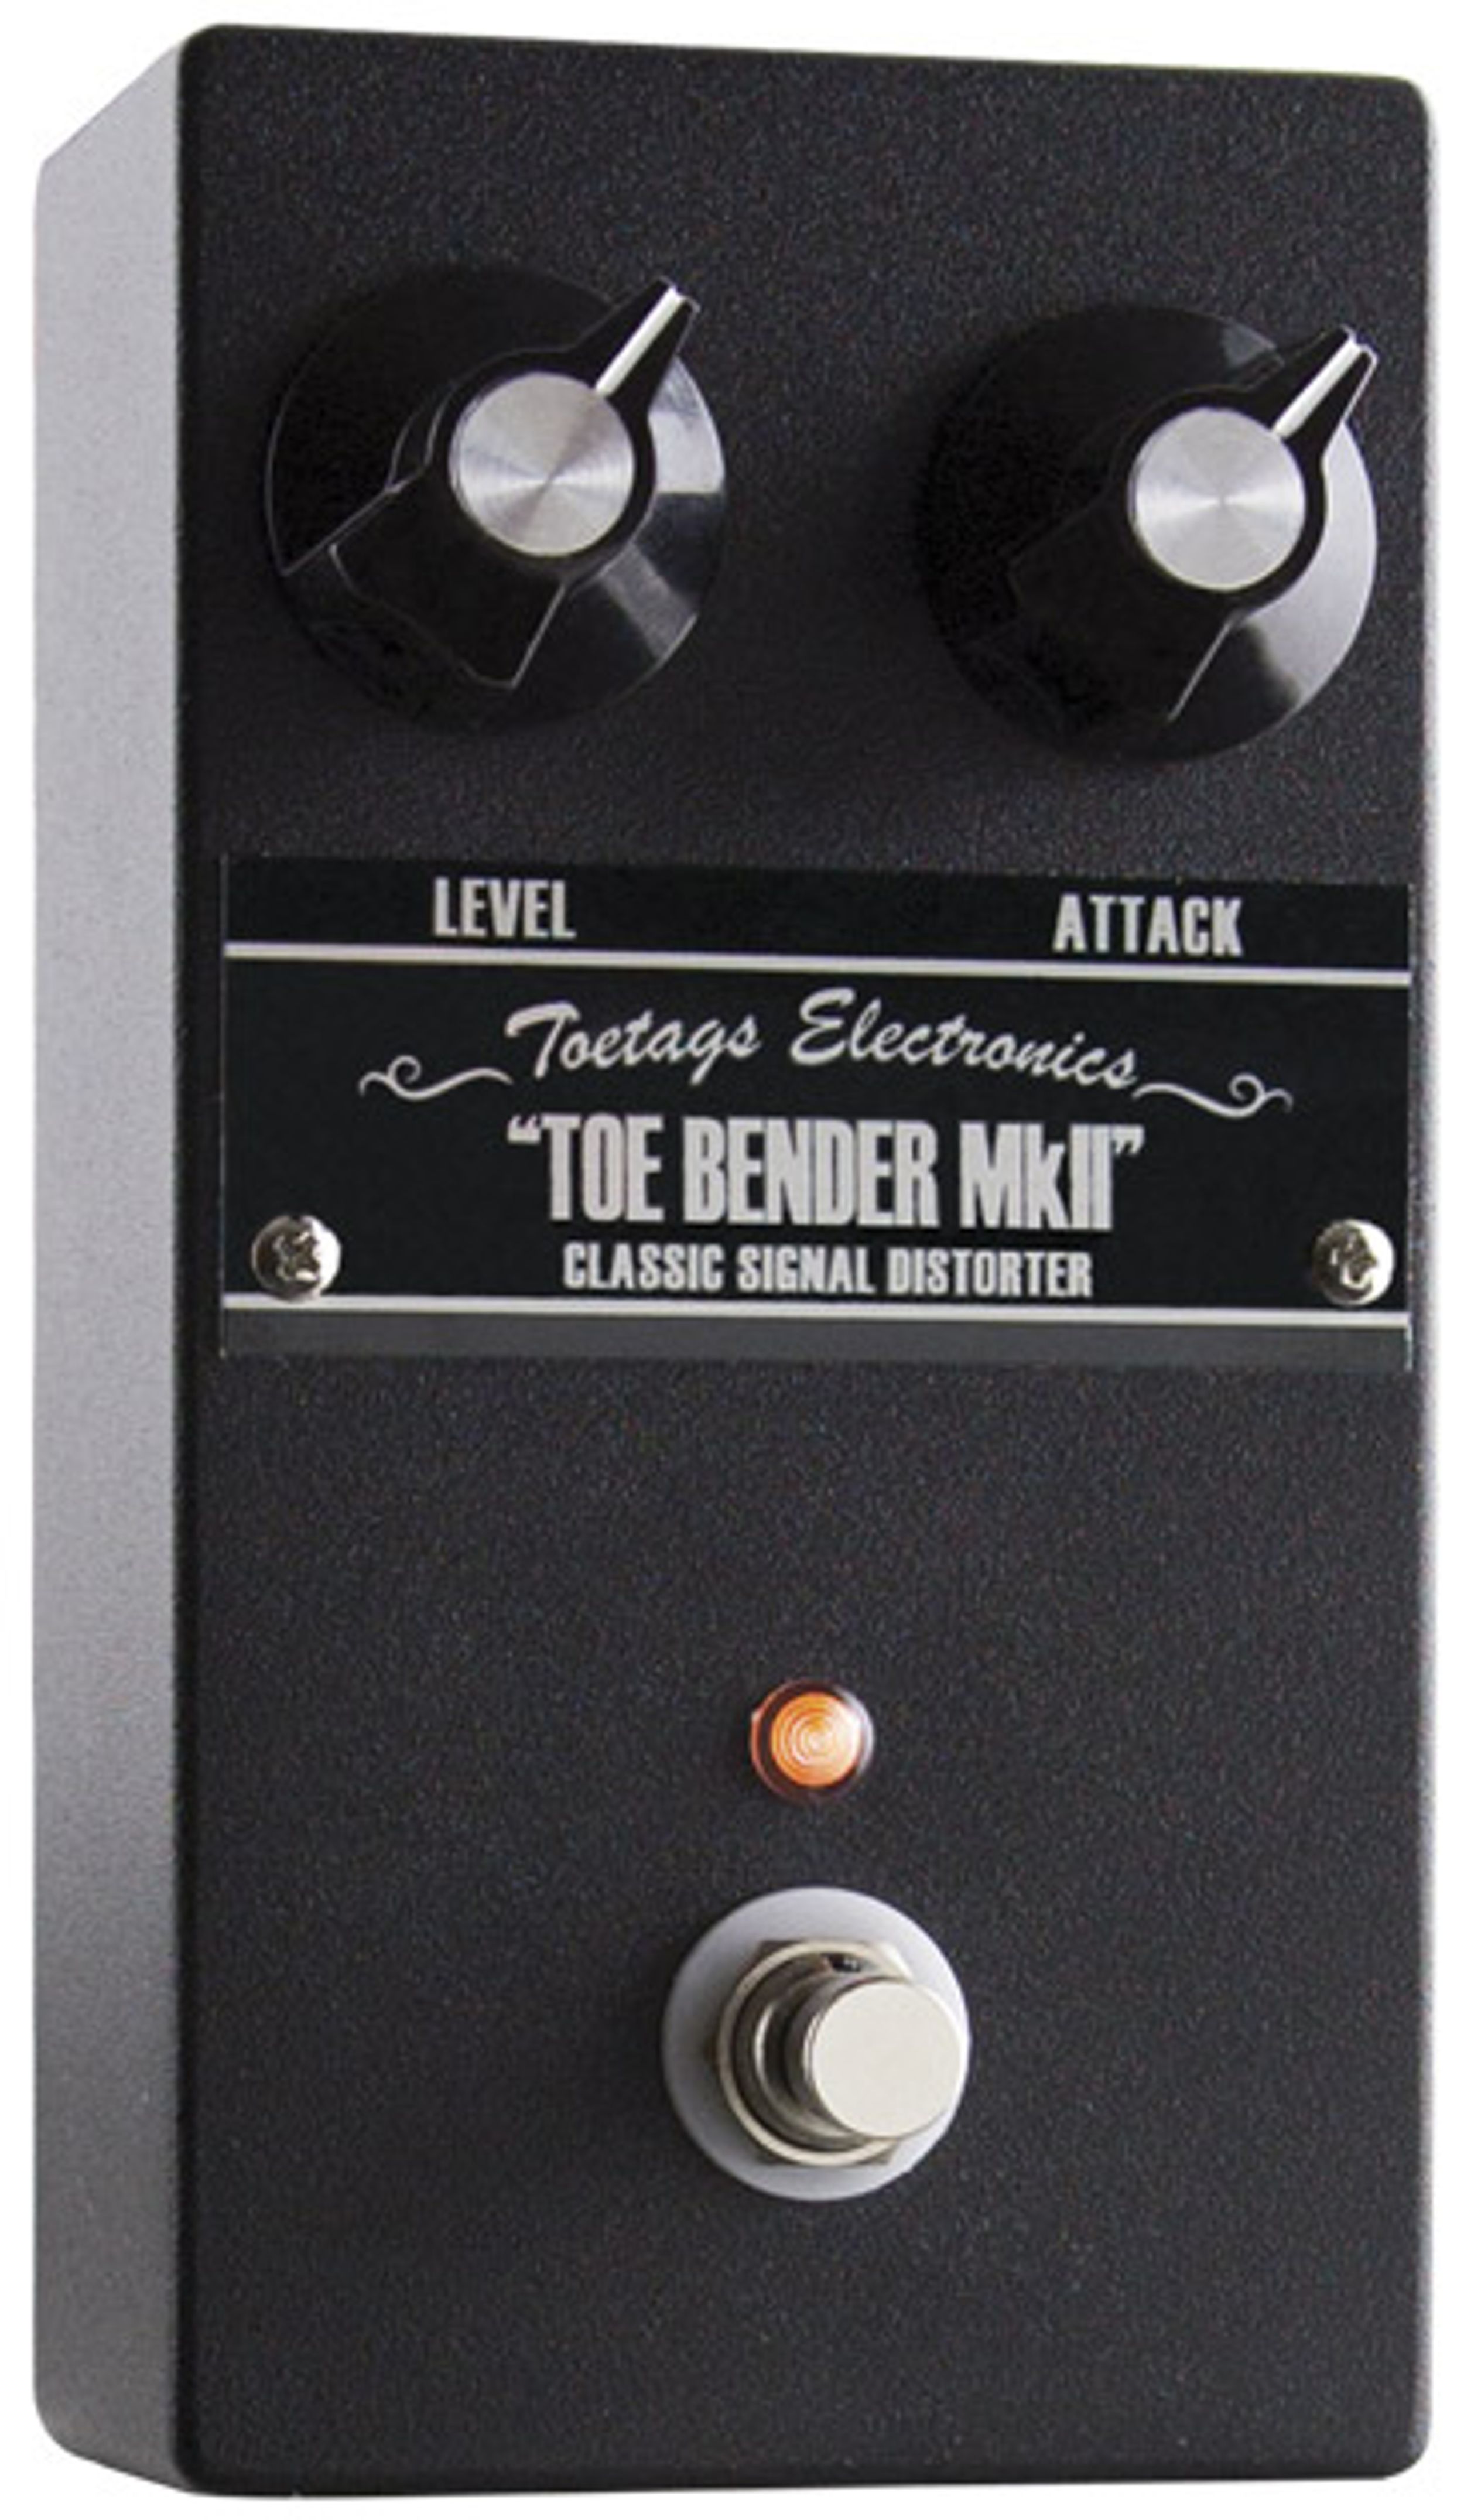 Toetags Electronics Toe Bender MkII Review